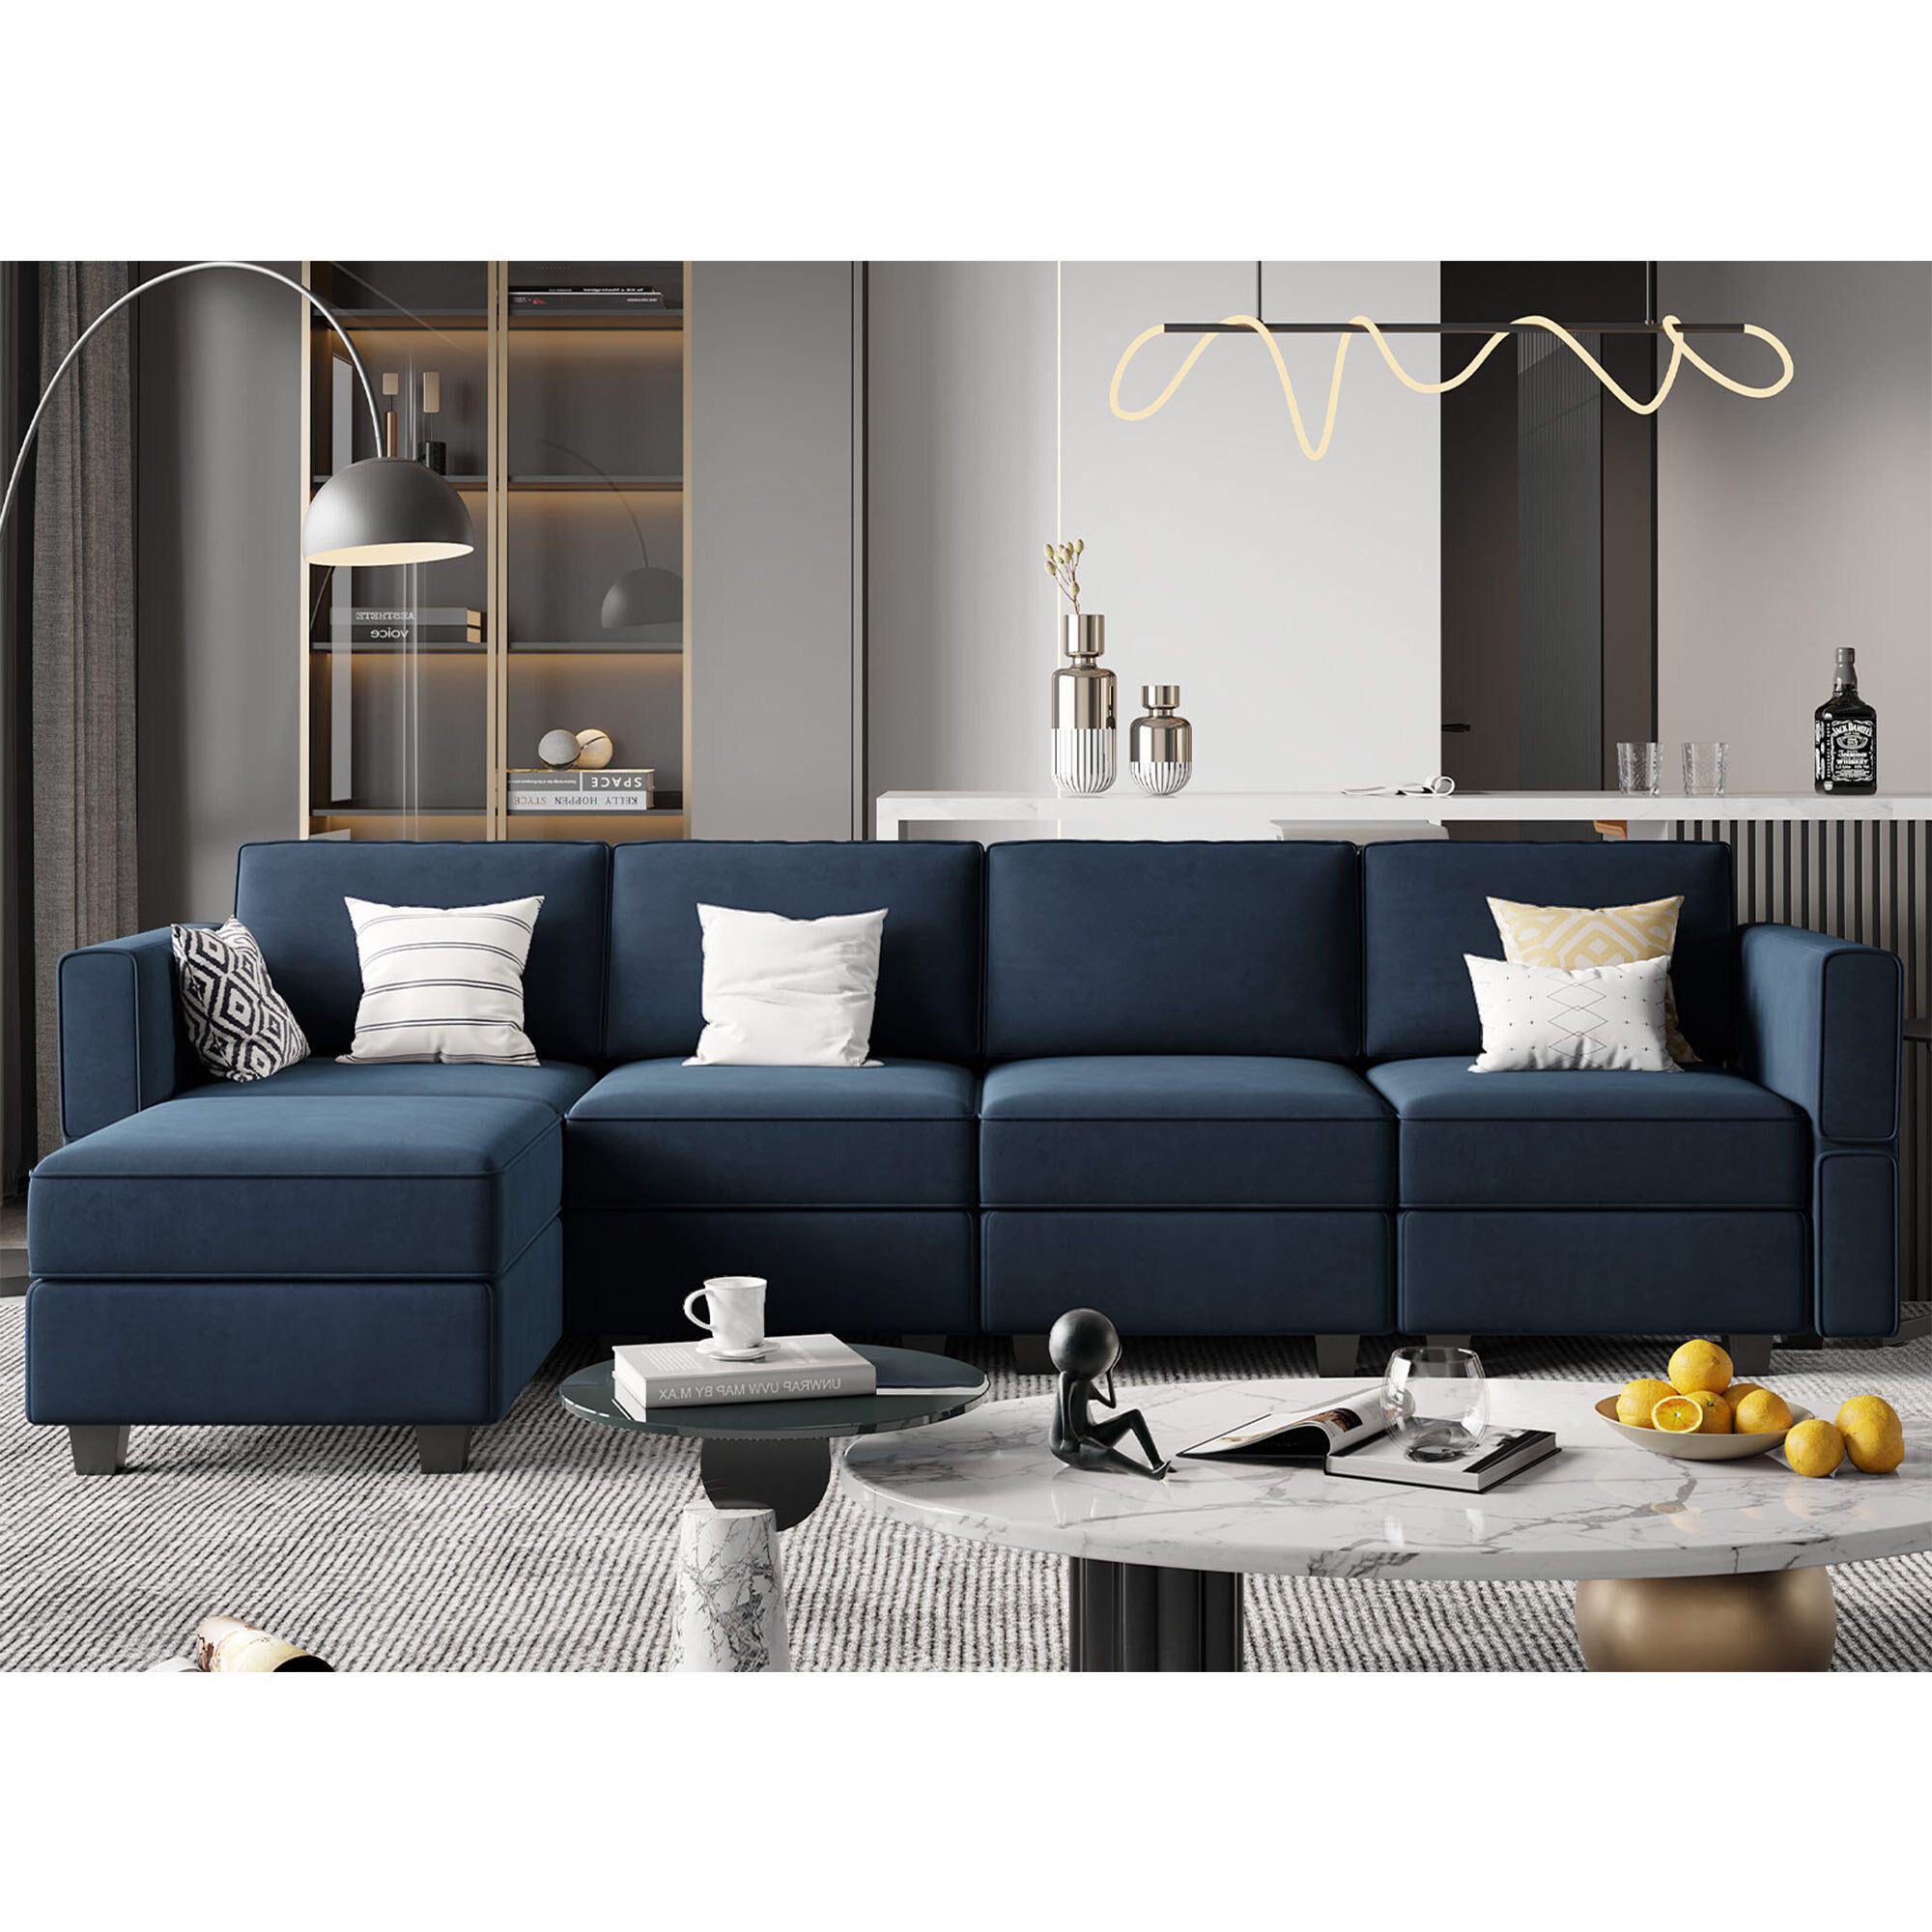 Latitude Run® Teangela 116.6'' Upholstered Sectional Sofa With Storage &  Reviews | Wayfair Inside Upholstered Modular Couches With Storage (Gallery 1 of 20)